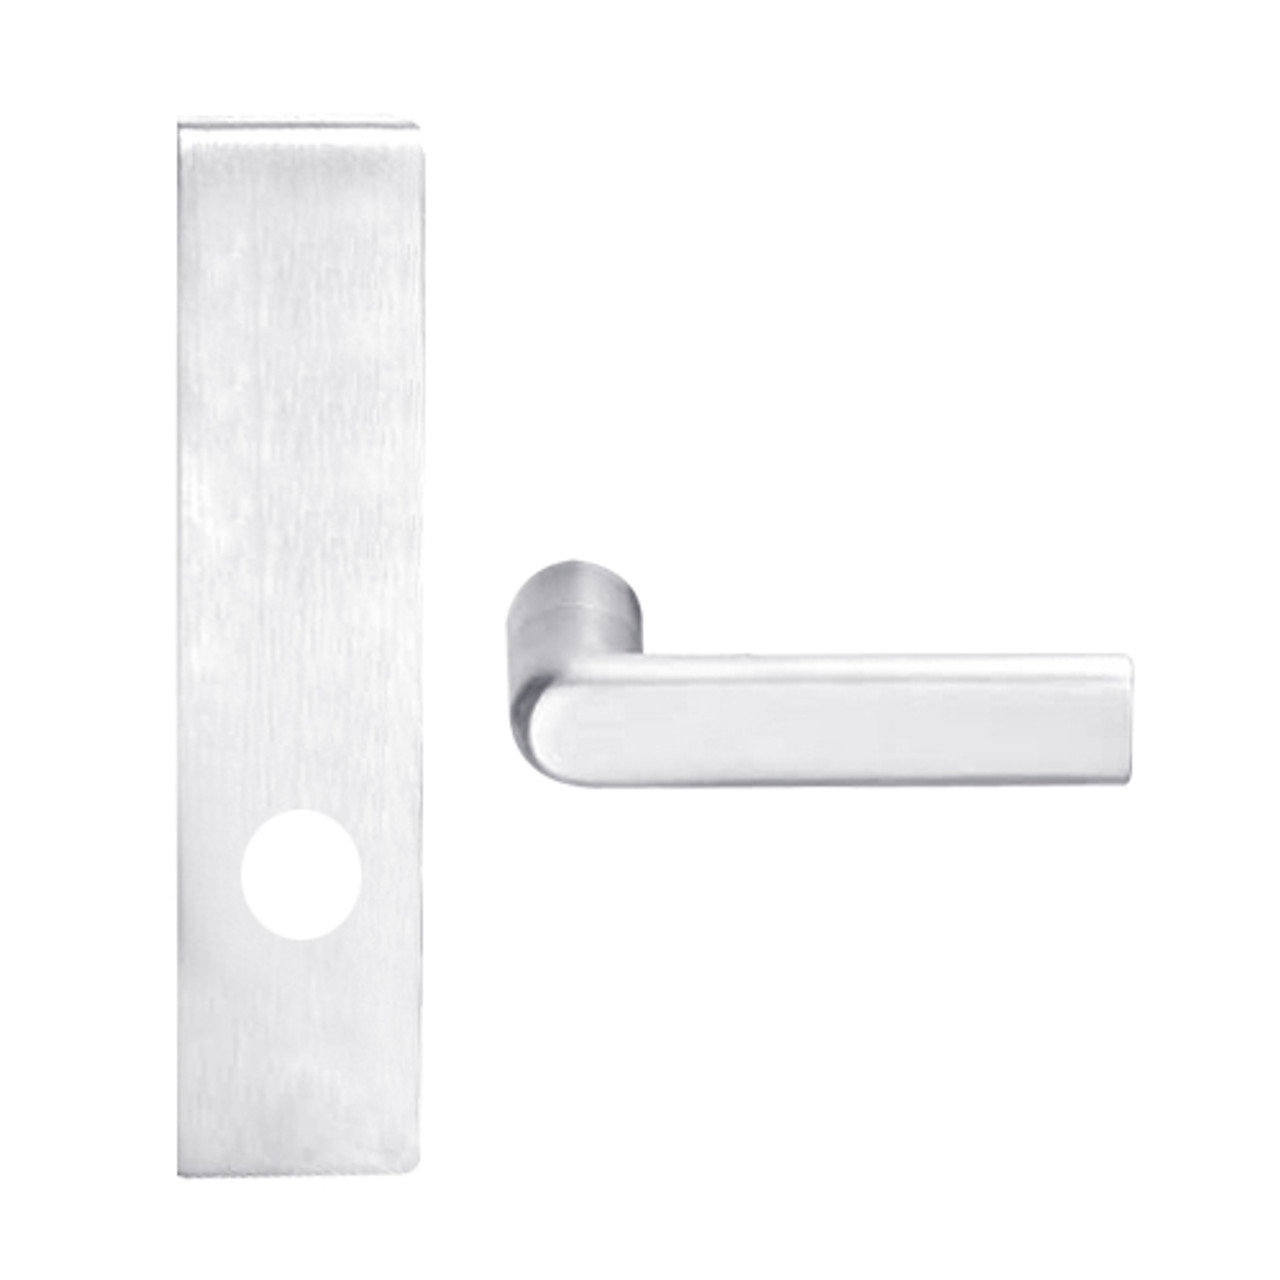 L9010-01L-619 Schlage L Series Passage Latch Commercial Mortise Lock with 01 Cast Lever Design in Satin Nickel